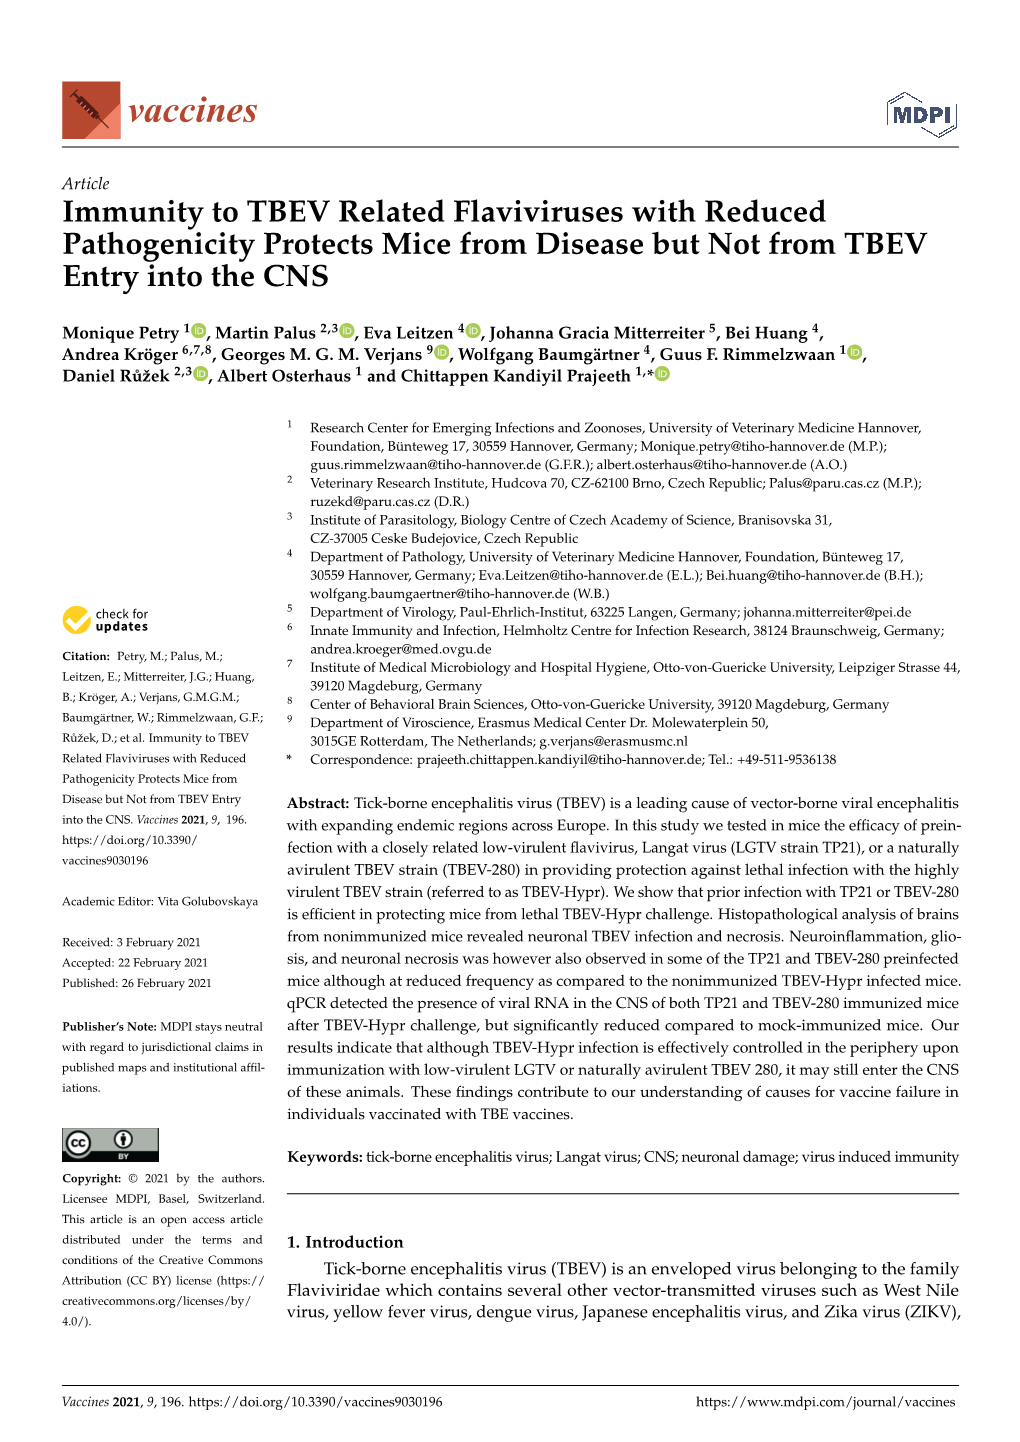 Immunity to TBEV Related Flaviviruses with Reduced Pathogenicity Protects Mice from Disease but Not from TBEV Entry Into the CNS